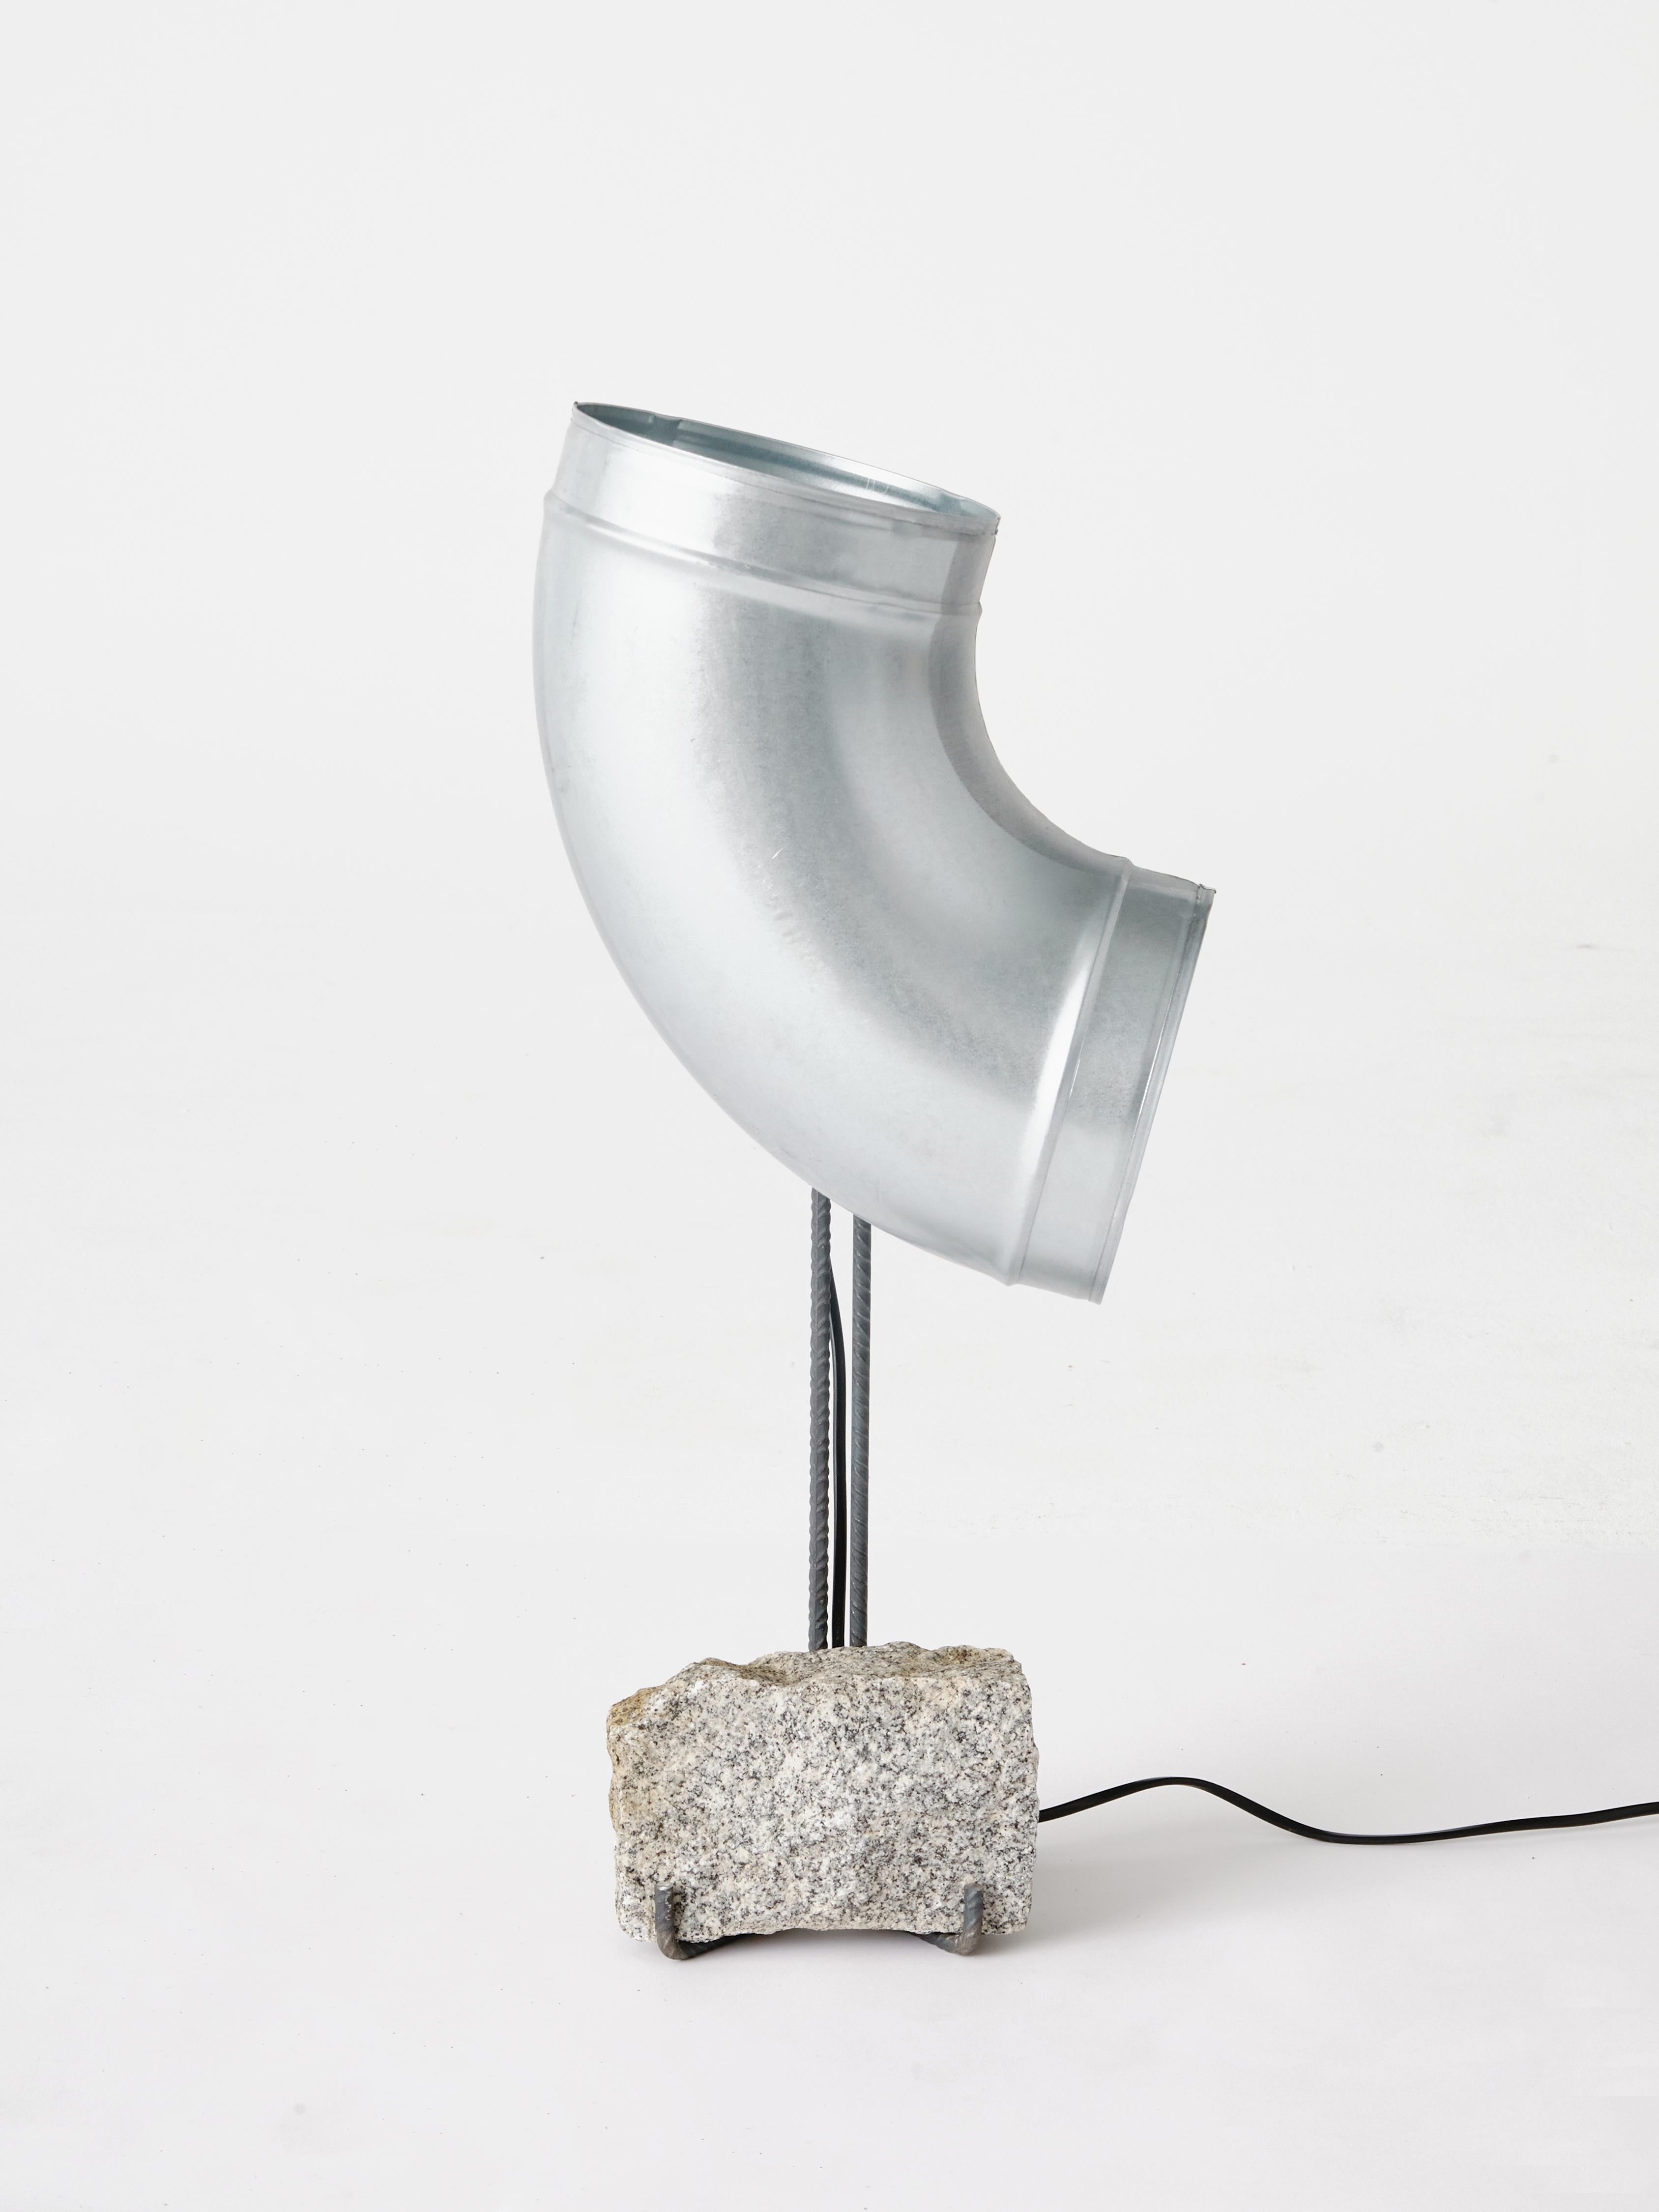 This 'Pipe, Rod and Brick' tubular steel table lamp forms part of the Series O.F.I.S (Objects From Intersticial Space), an ongoing research of industrial material's potential for narrative. Muñoz designed this Tubular Steel table as an exploration